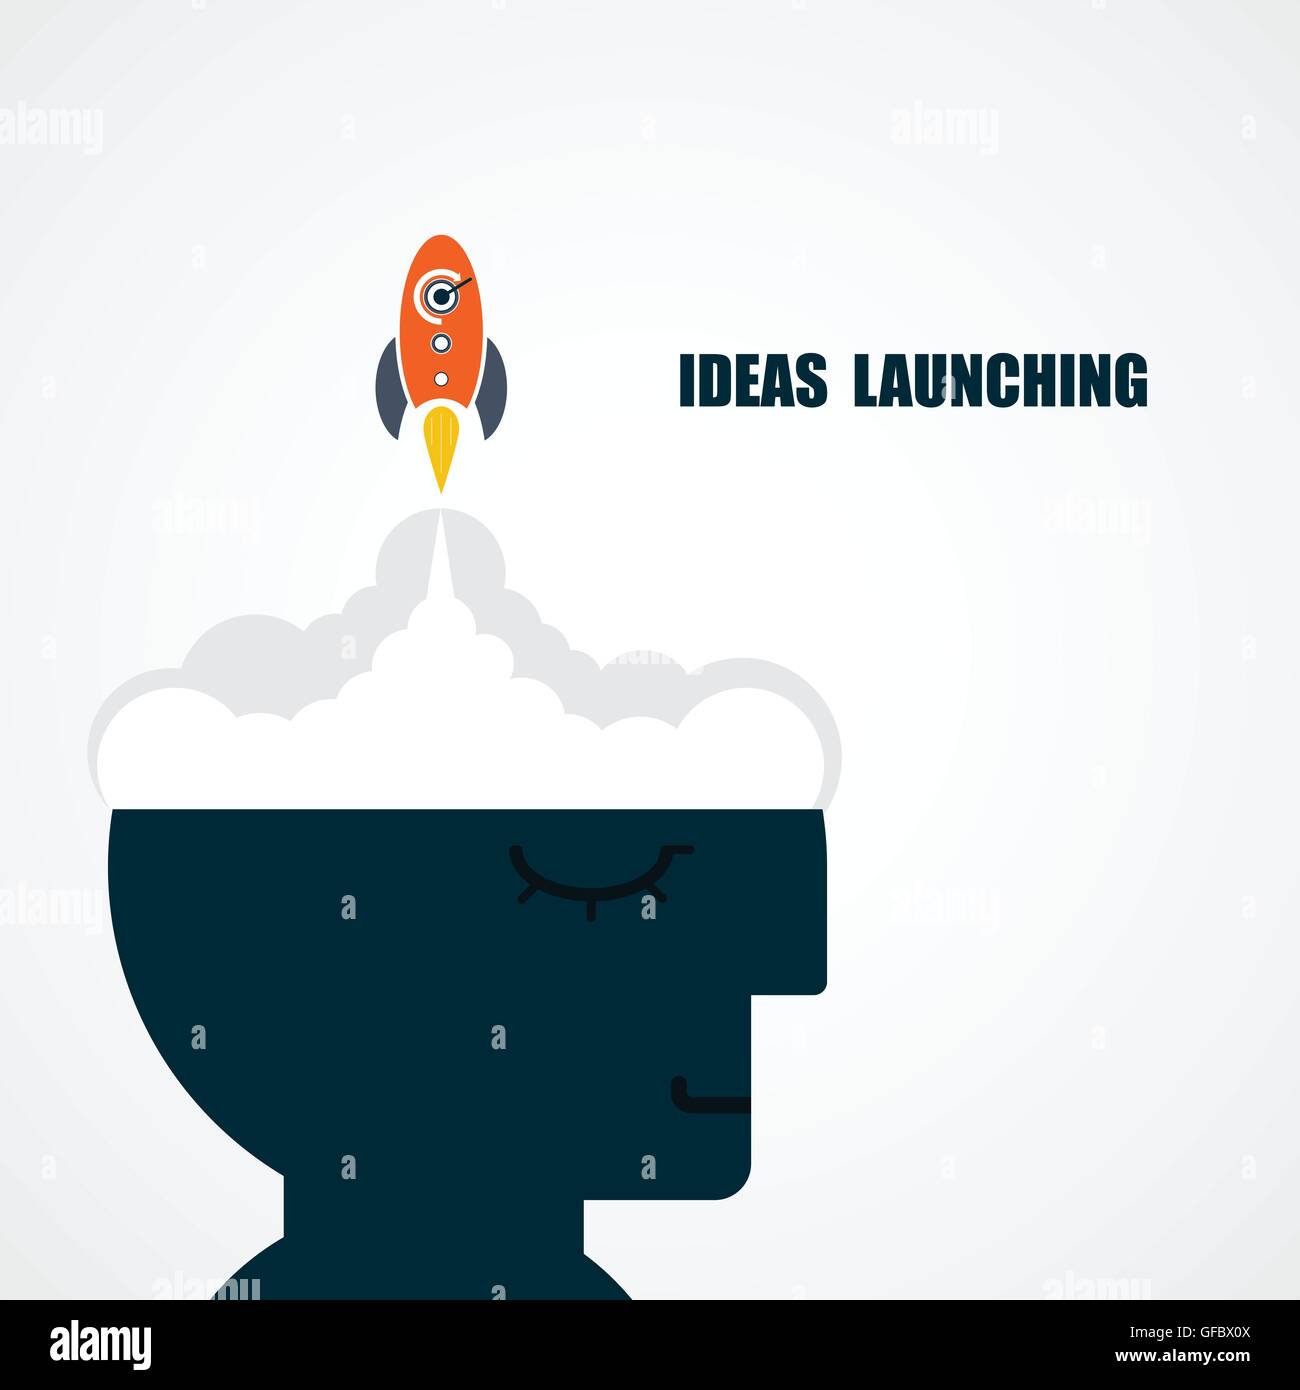 Human head and rocket icon.Ideas and business launching icon.Business start up icon concept.Vector illustration Stock Vector